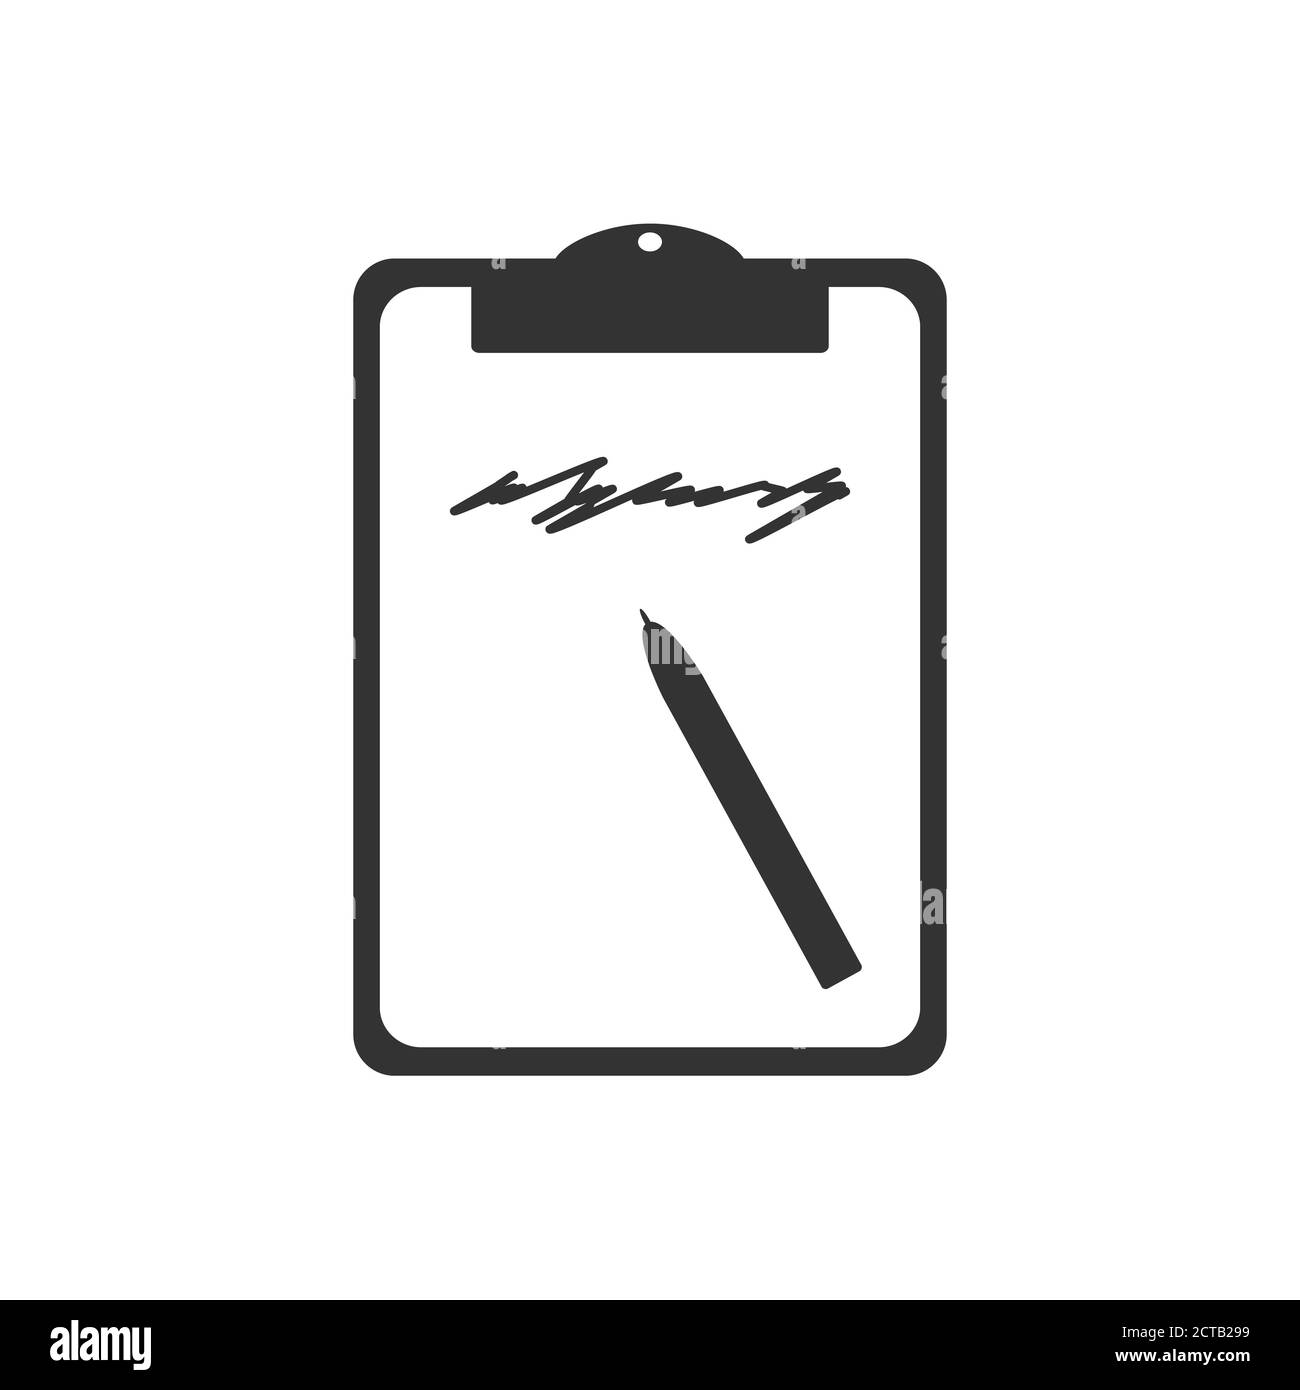 Clipboard, pen icon. Flat Illustration with text. Vector Stock Vector